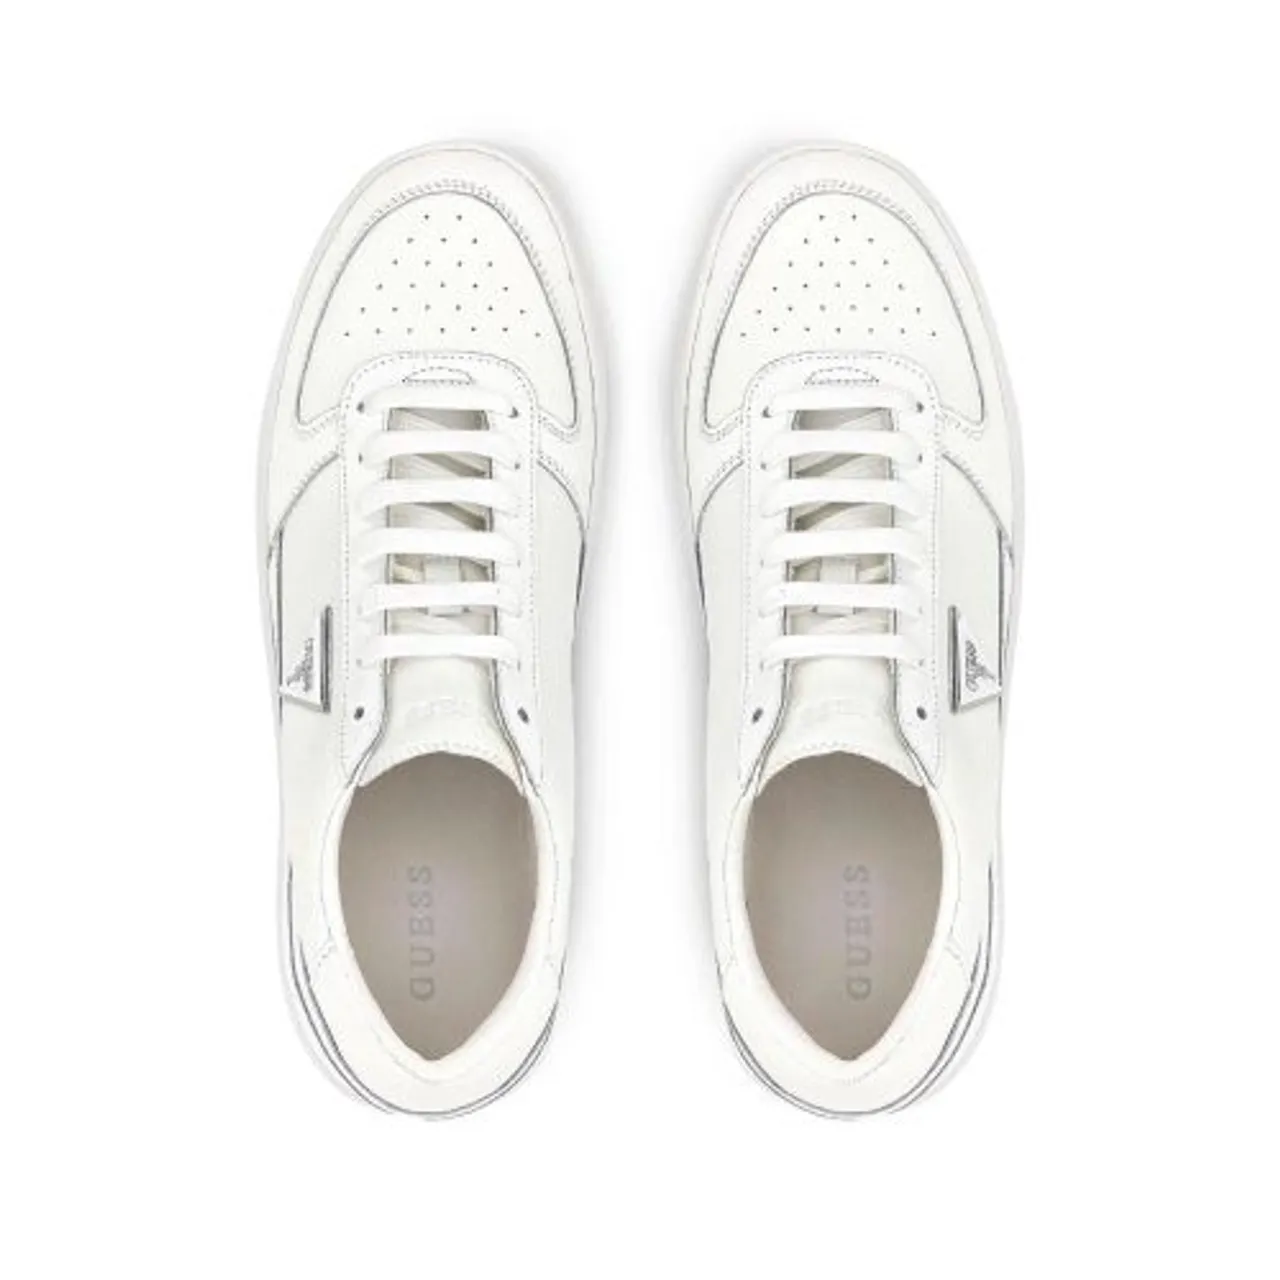 GUESS Mens White Silea Trainer